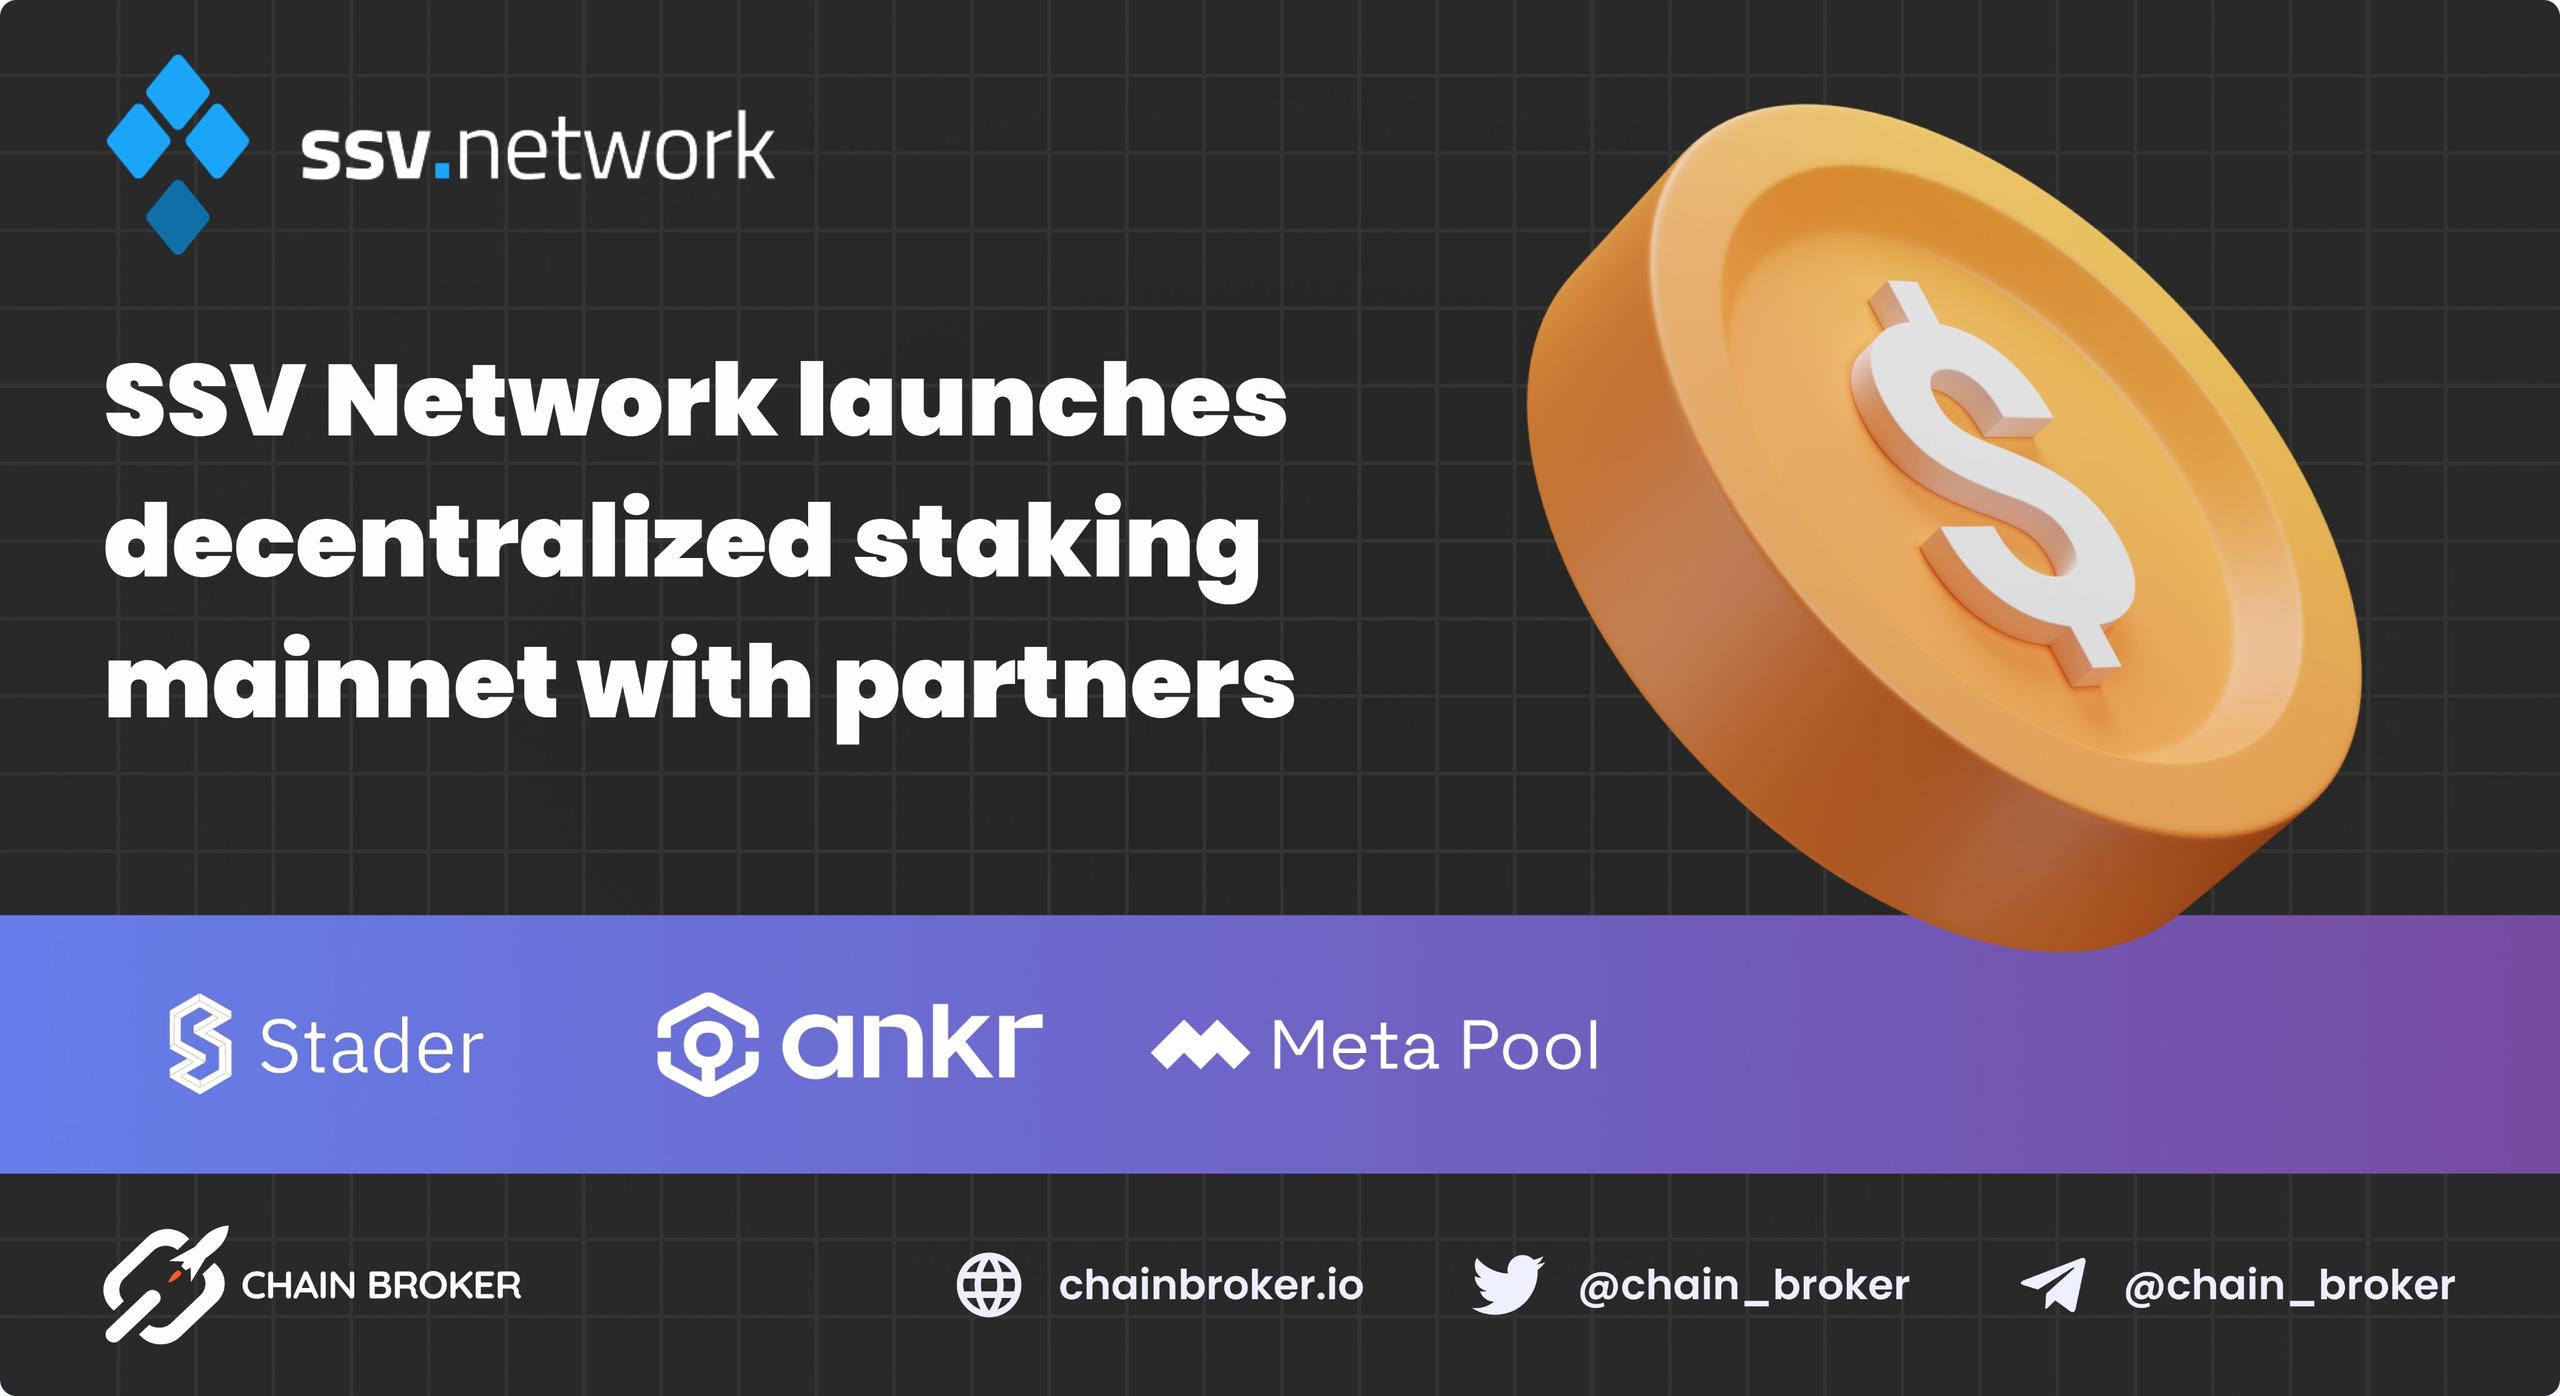 SSV Network announces launch of its decentralized staking mainnet